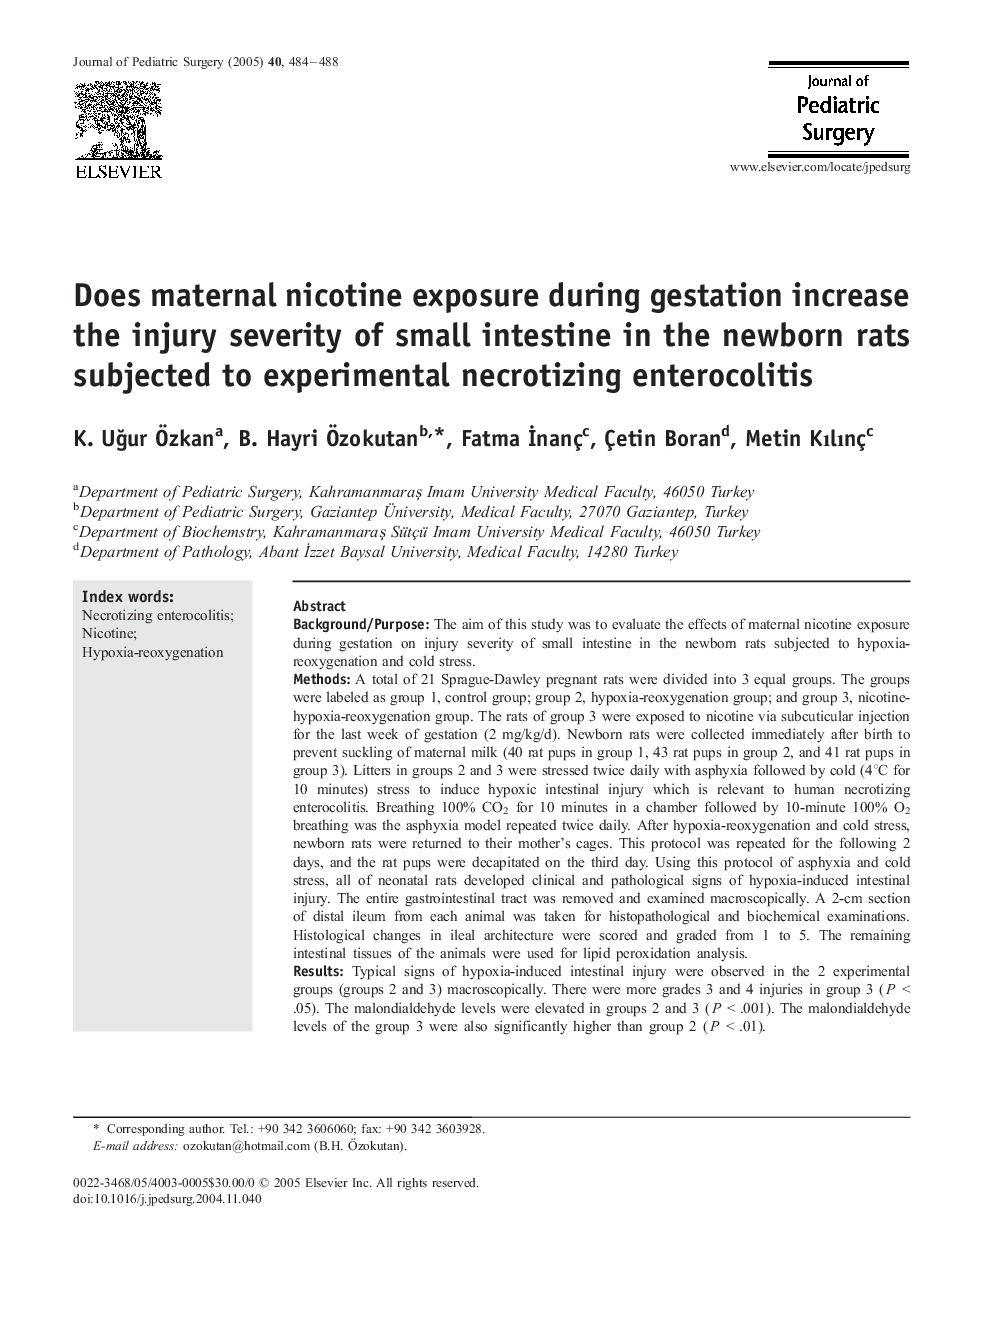 Does maternal nicotine exposure during gestation increase the injury severity of small intestine in the newborn rats subjected to experimental necrotizing enterocolitis